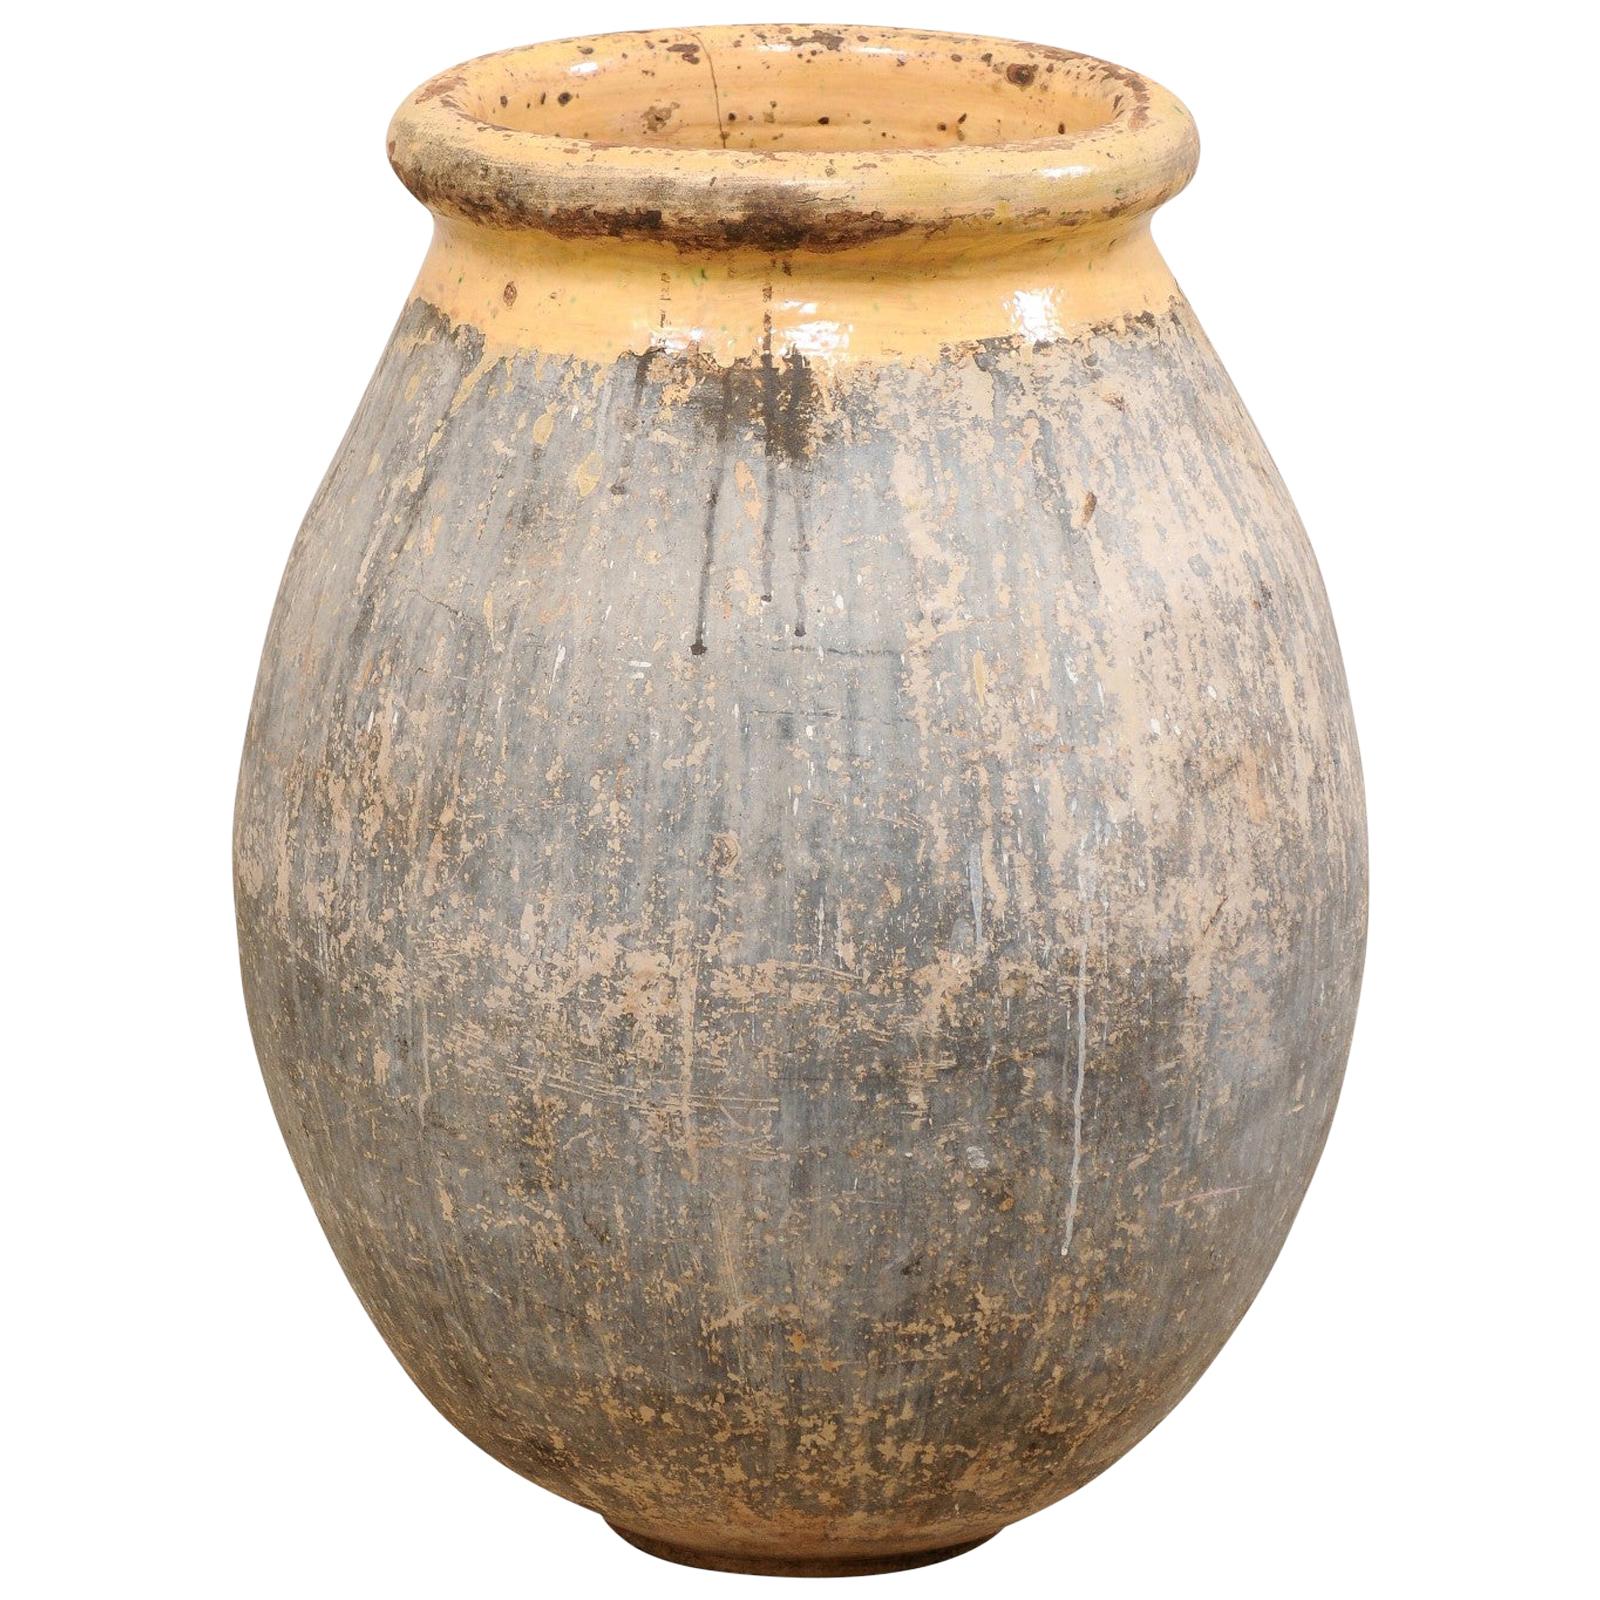 What is a biot jar?